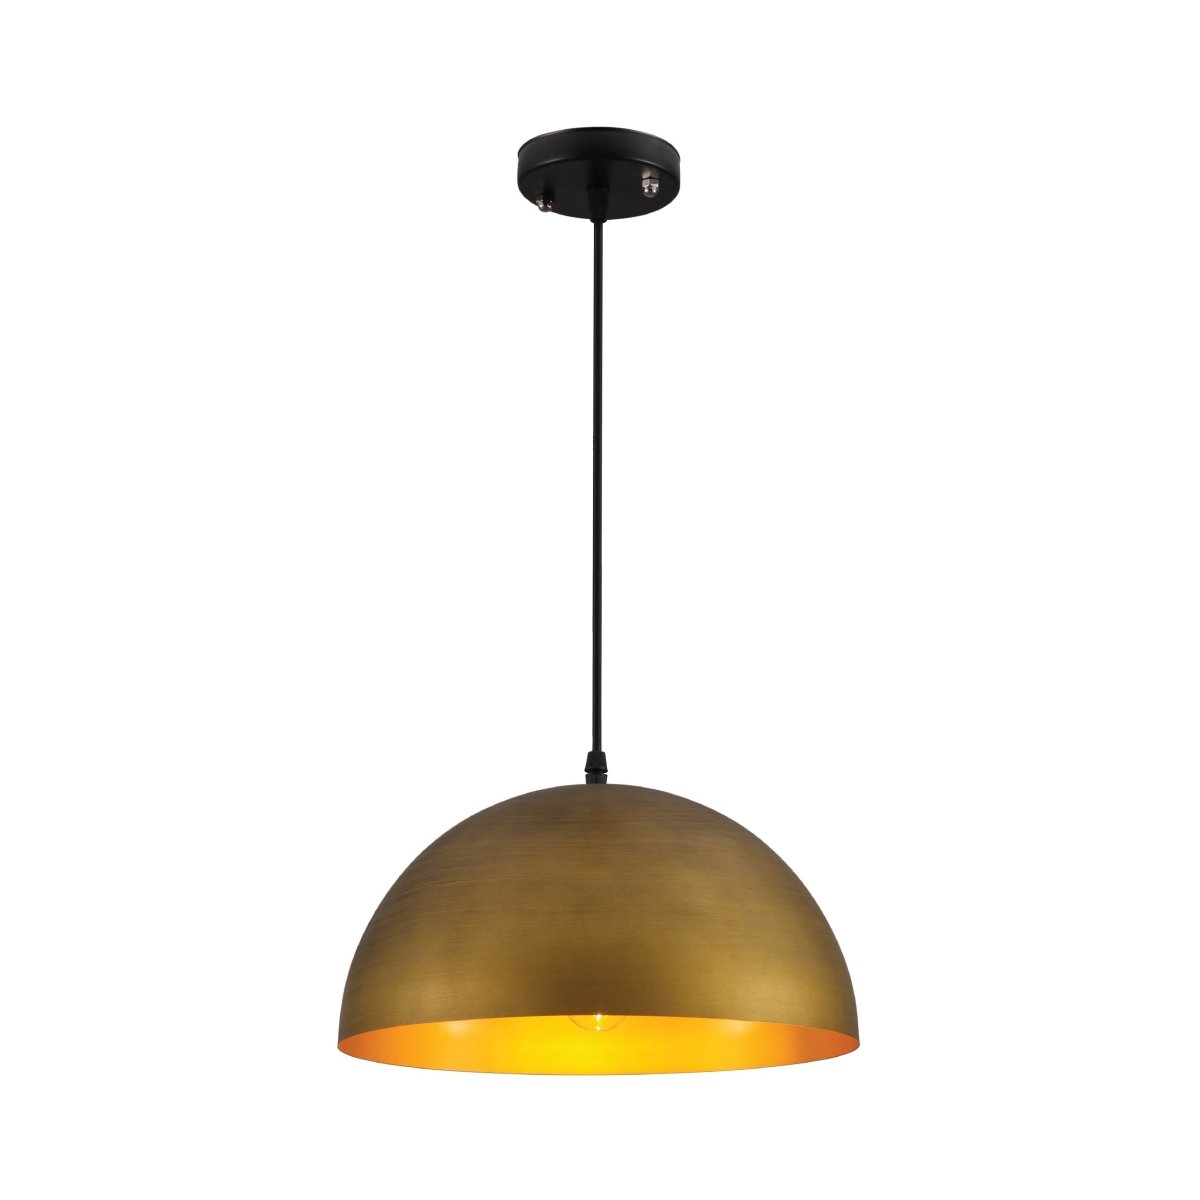 main image of diameter with 300 mm Yellow Brass Finish dome Metal Pendant Ceiling Light E27 Fitting 159-17750